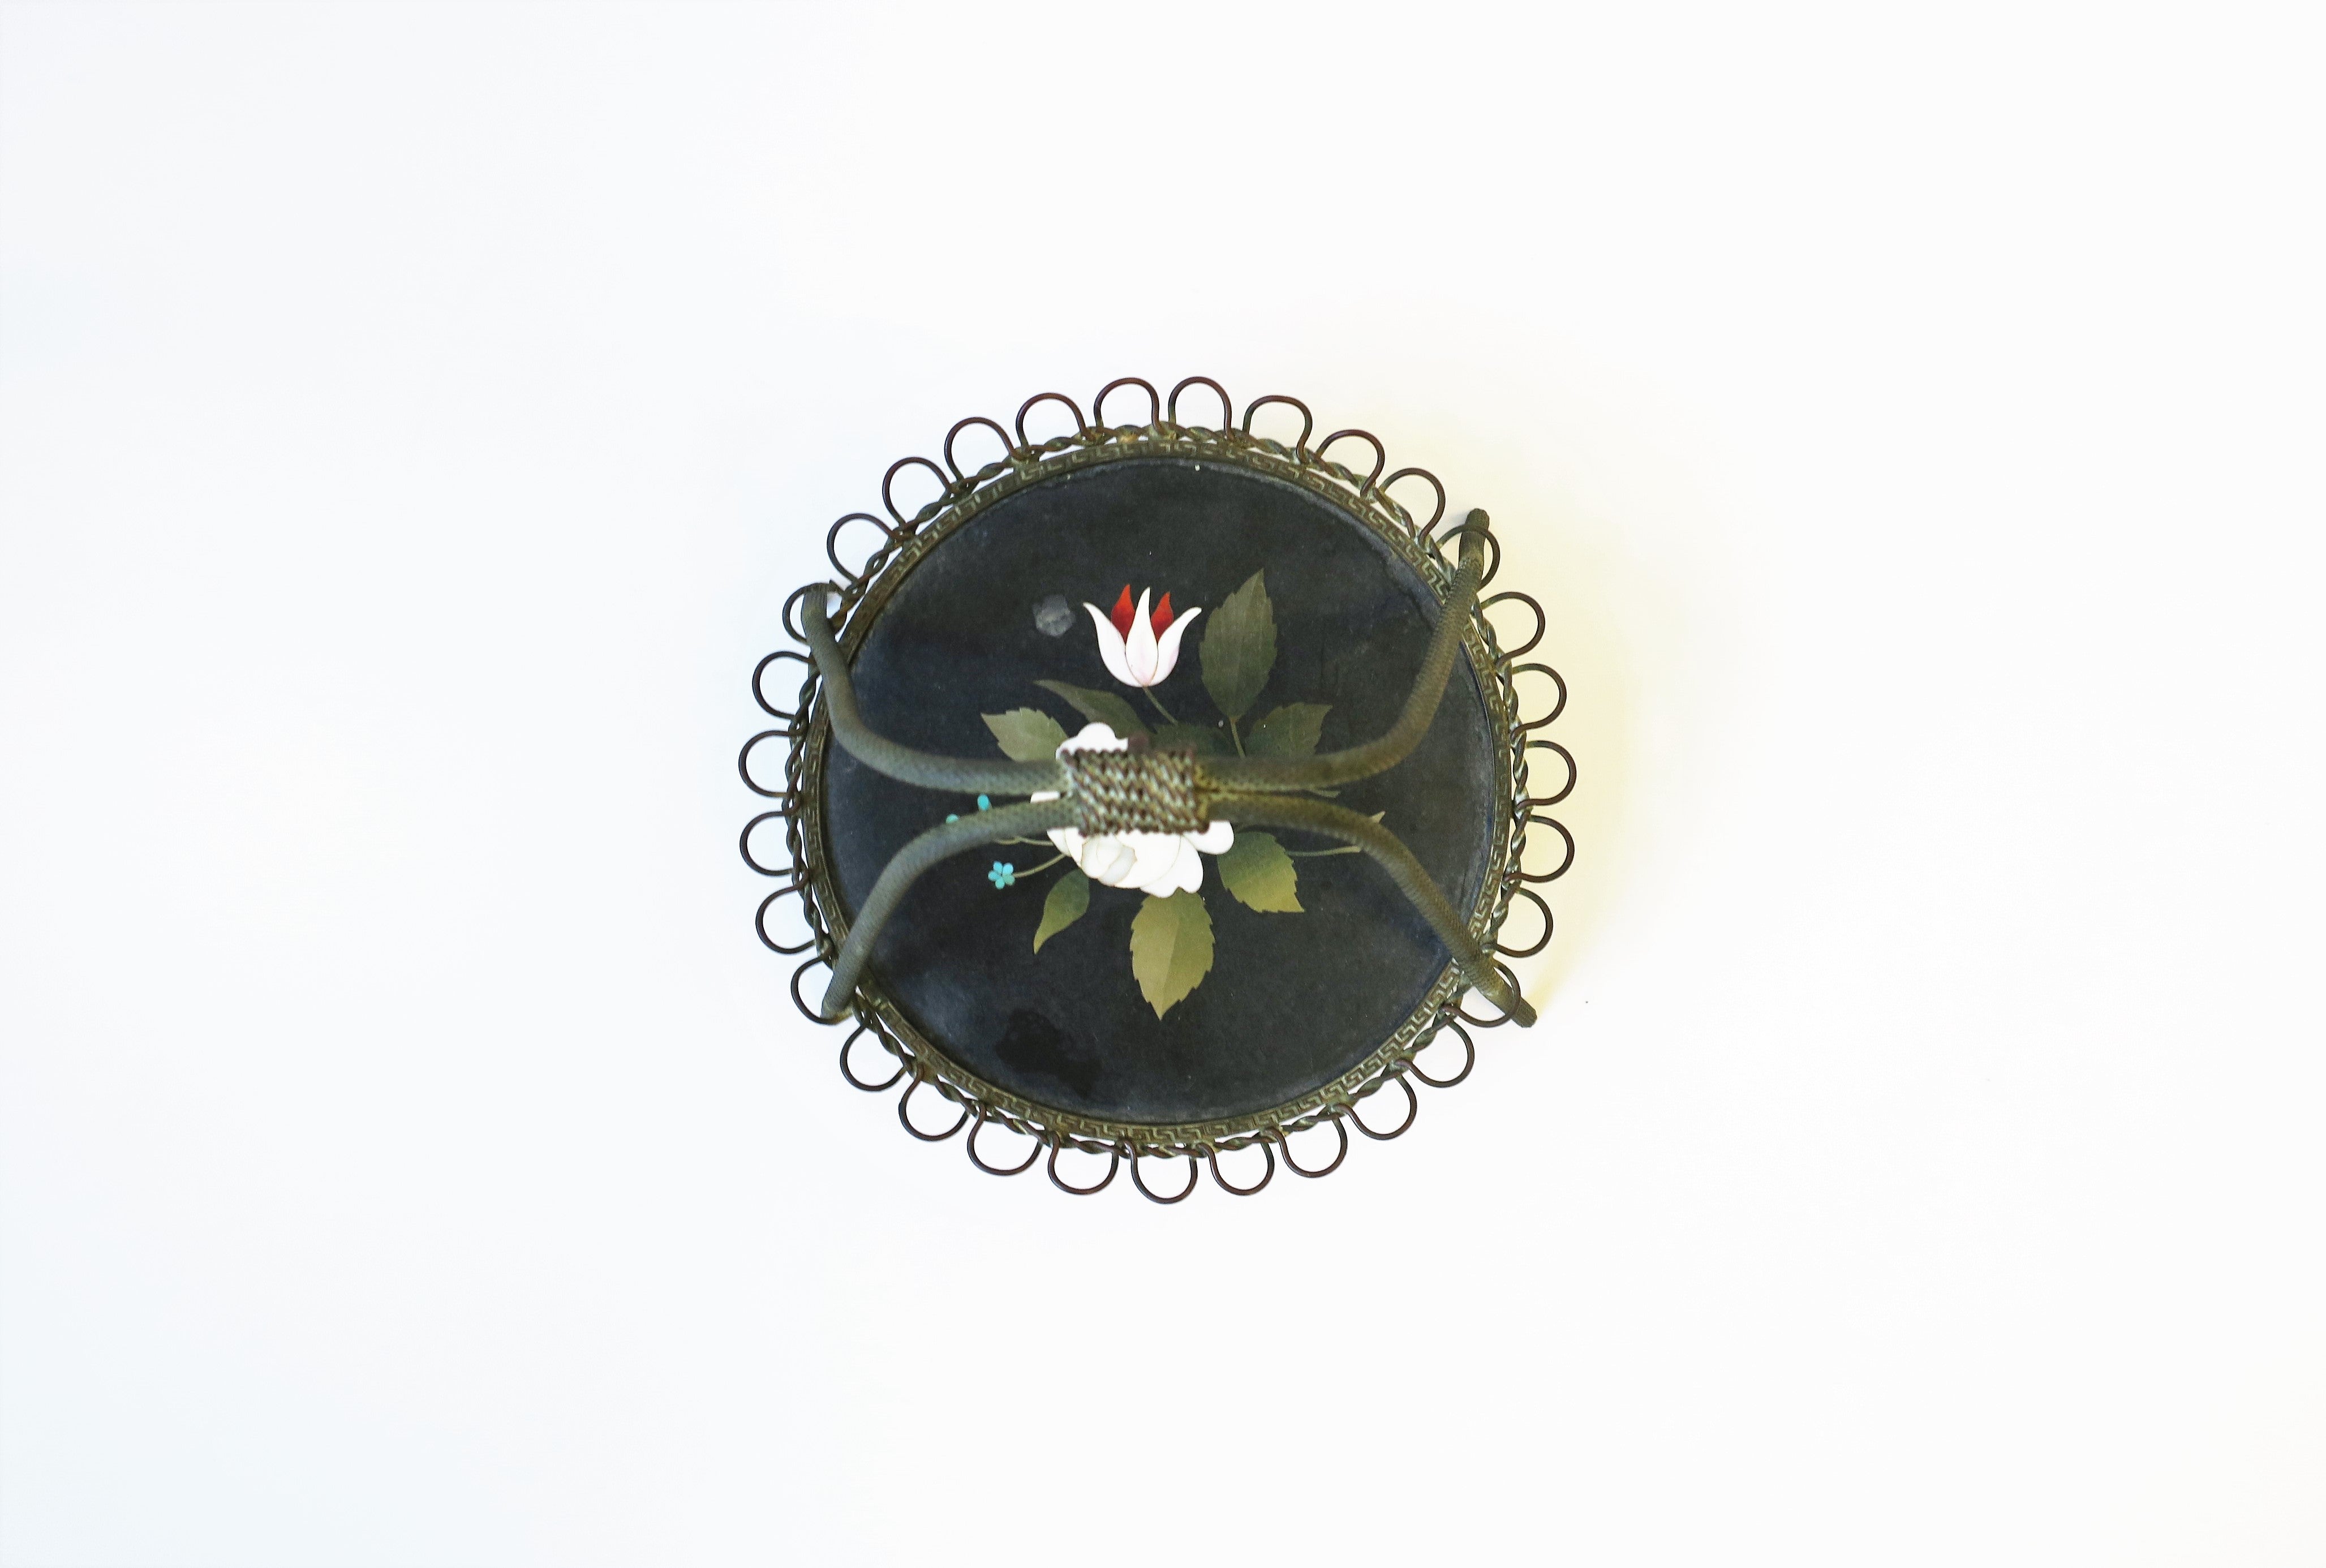 A very beautiful Italian Pietra Dura pocket watch stand with flower and leaf relief, circa early-20th century, Florence, Italy. Piece is a bronze or brass metal with a round black marble base with hand-cut inlayed marble and other stones. Pietra